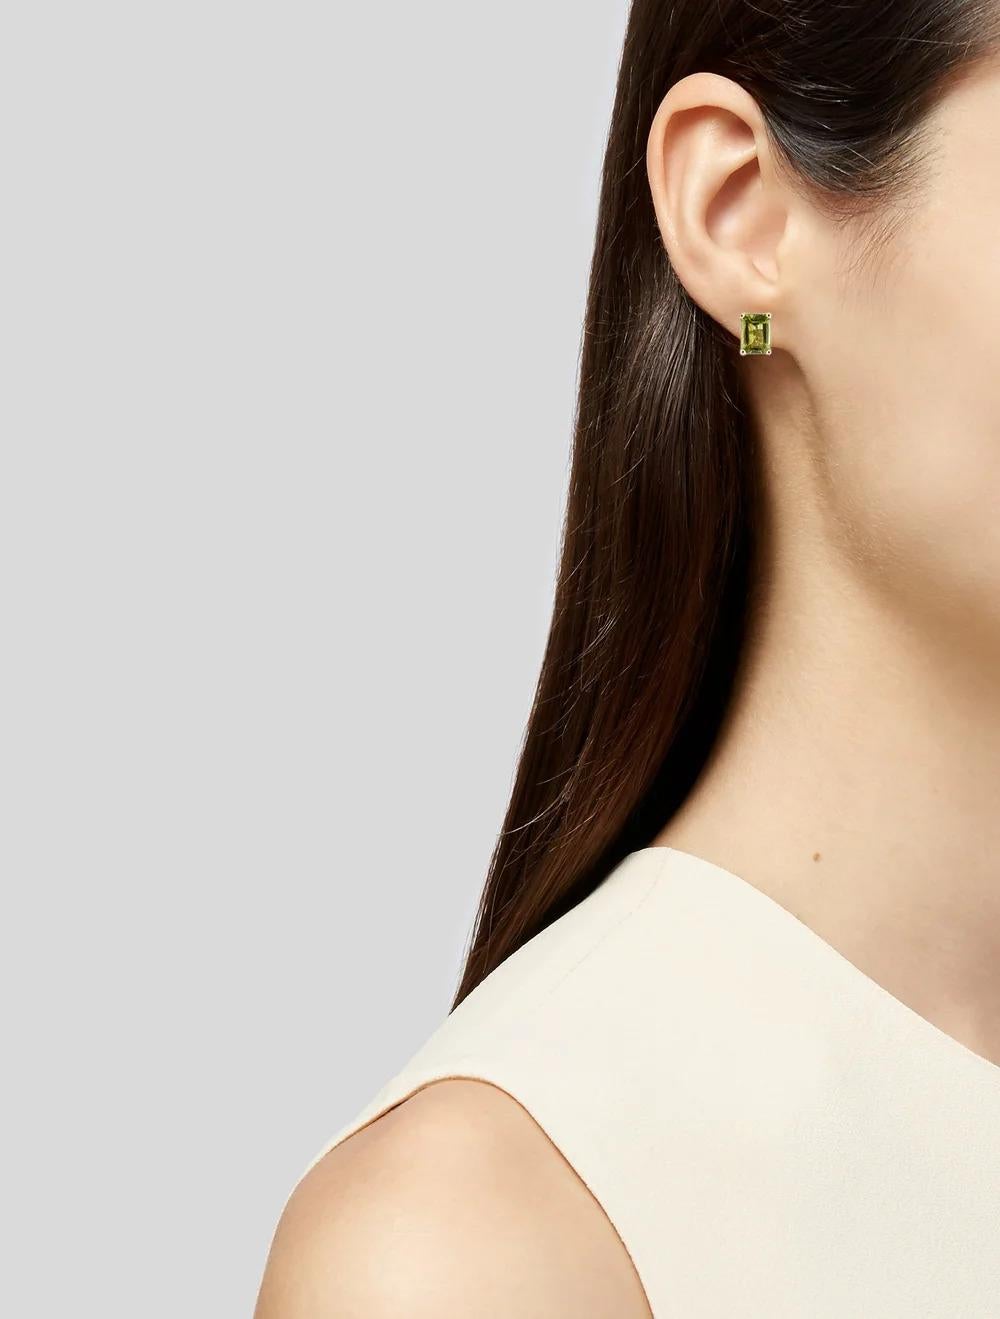 Introducing a dazzling piece of fine jewelry that effortlessly blends elegance with sophistication:

Elevate your ensemble with these exquisite 14K Yellow Gold earrings, adorned with captivating Rectangular Step Cut Peridot gemstones totaling an